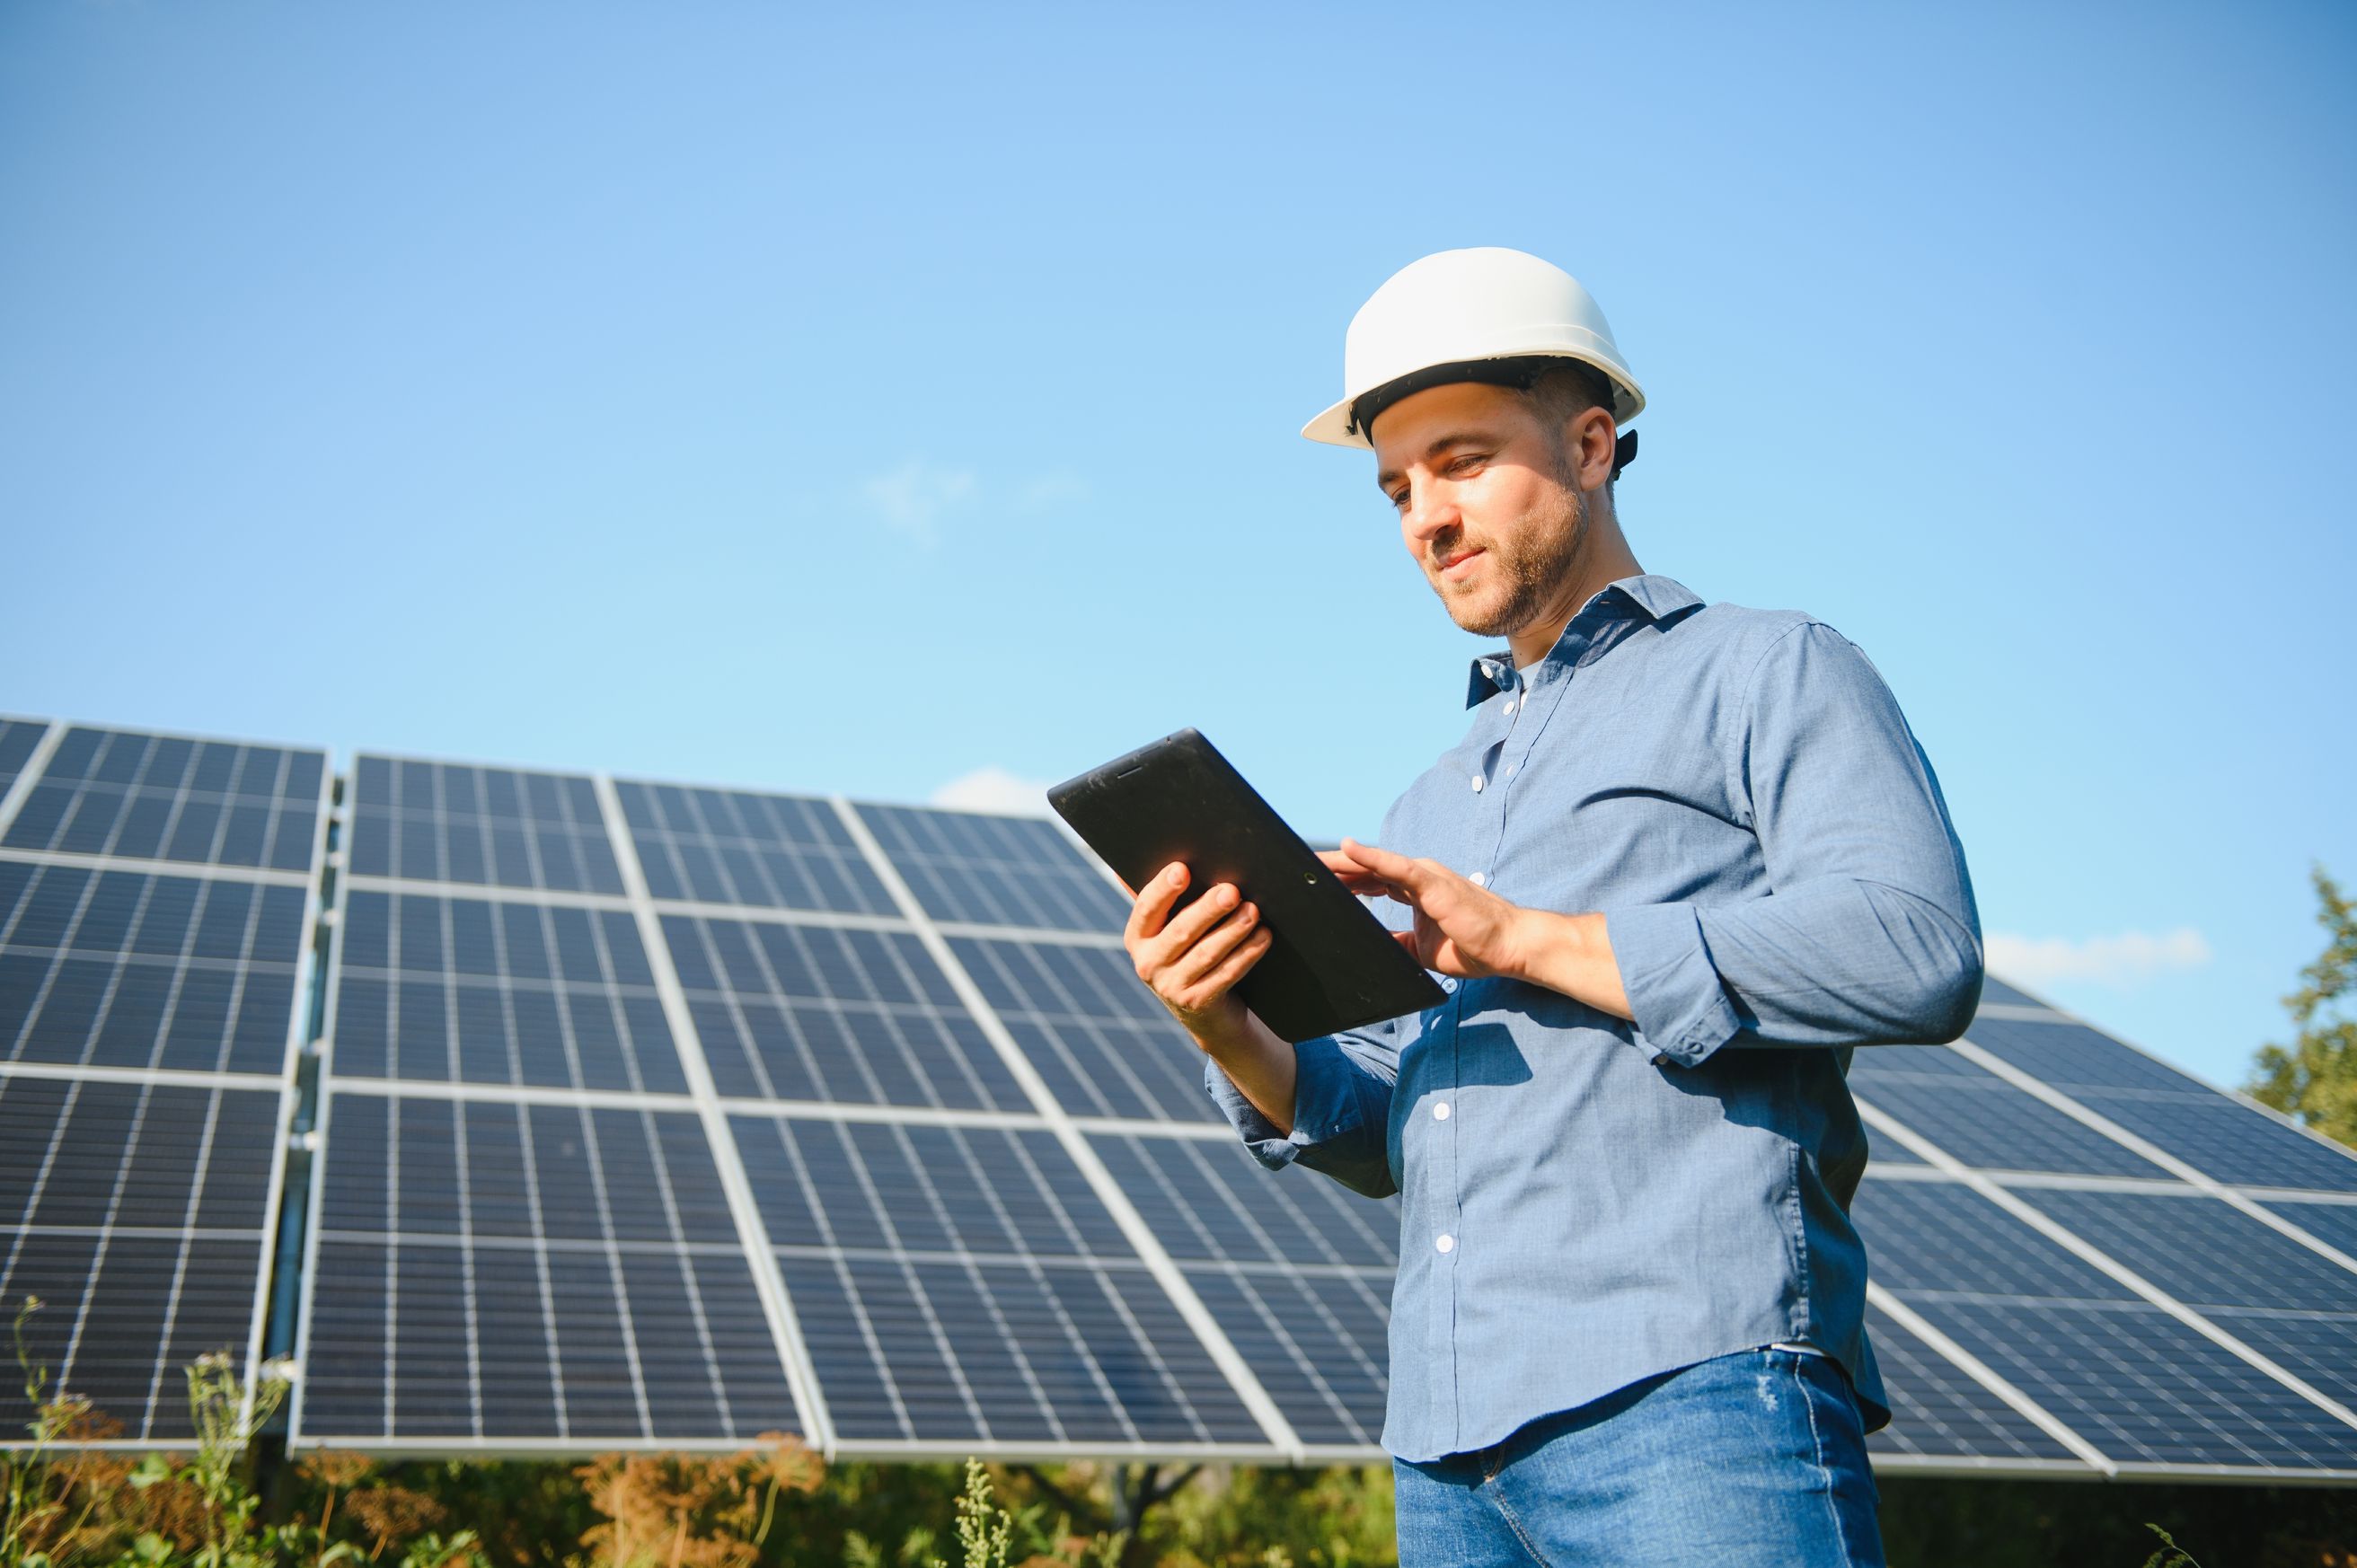 Energy and resources expert working on solar panels